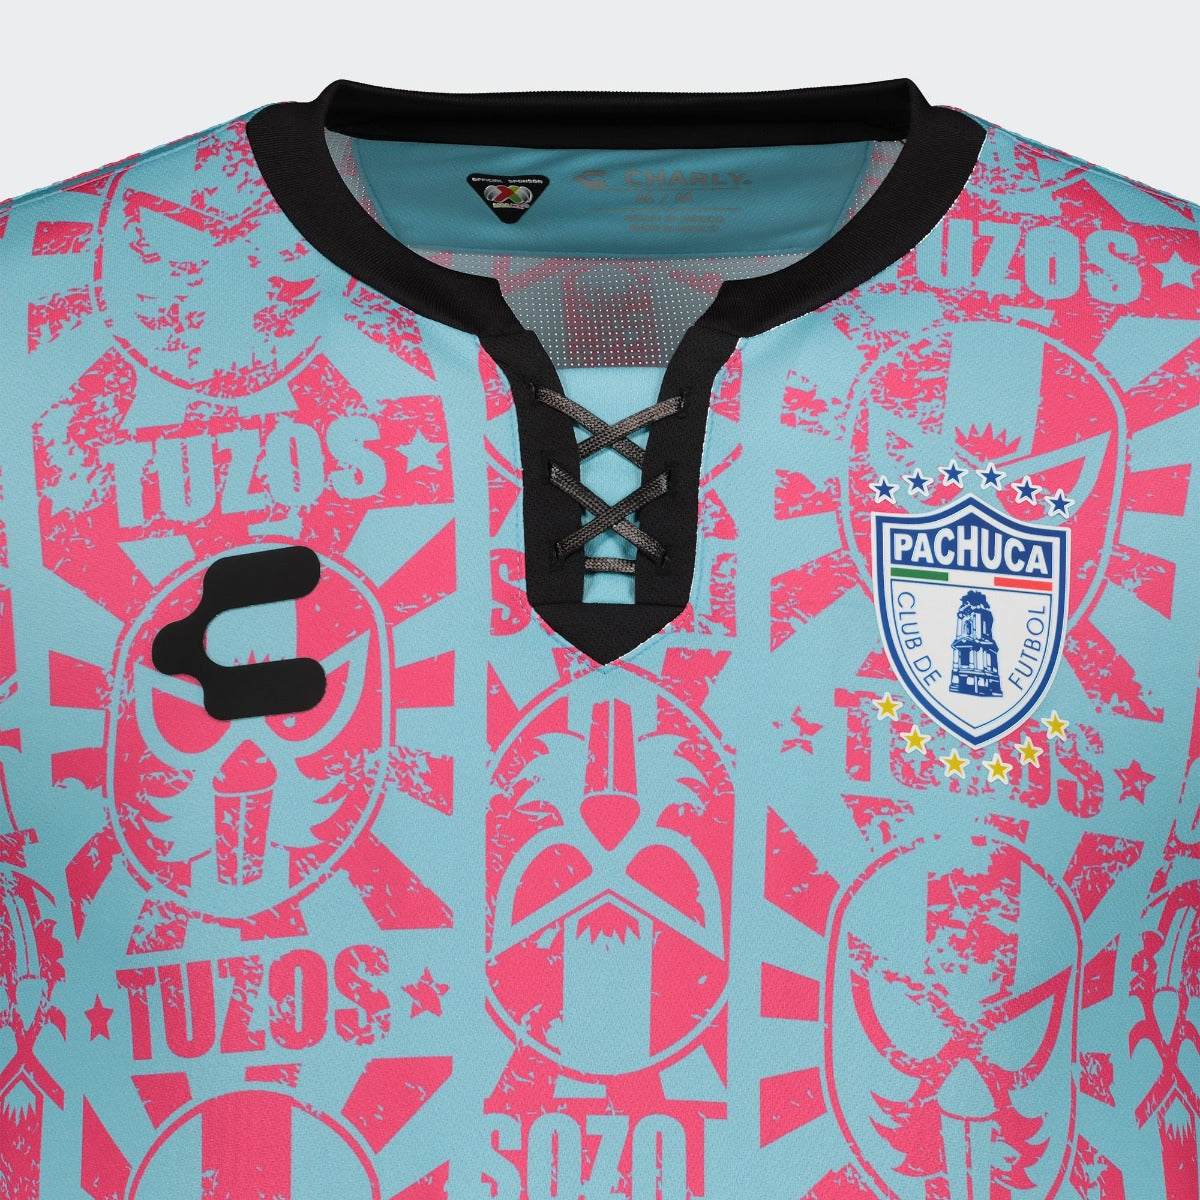 Charly 2021-22 Pachuca Third Jersey - Light Blue-Pink (Detail 2)